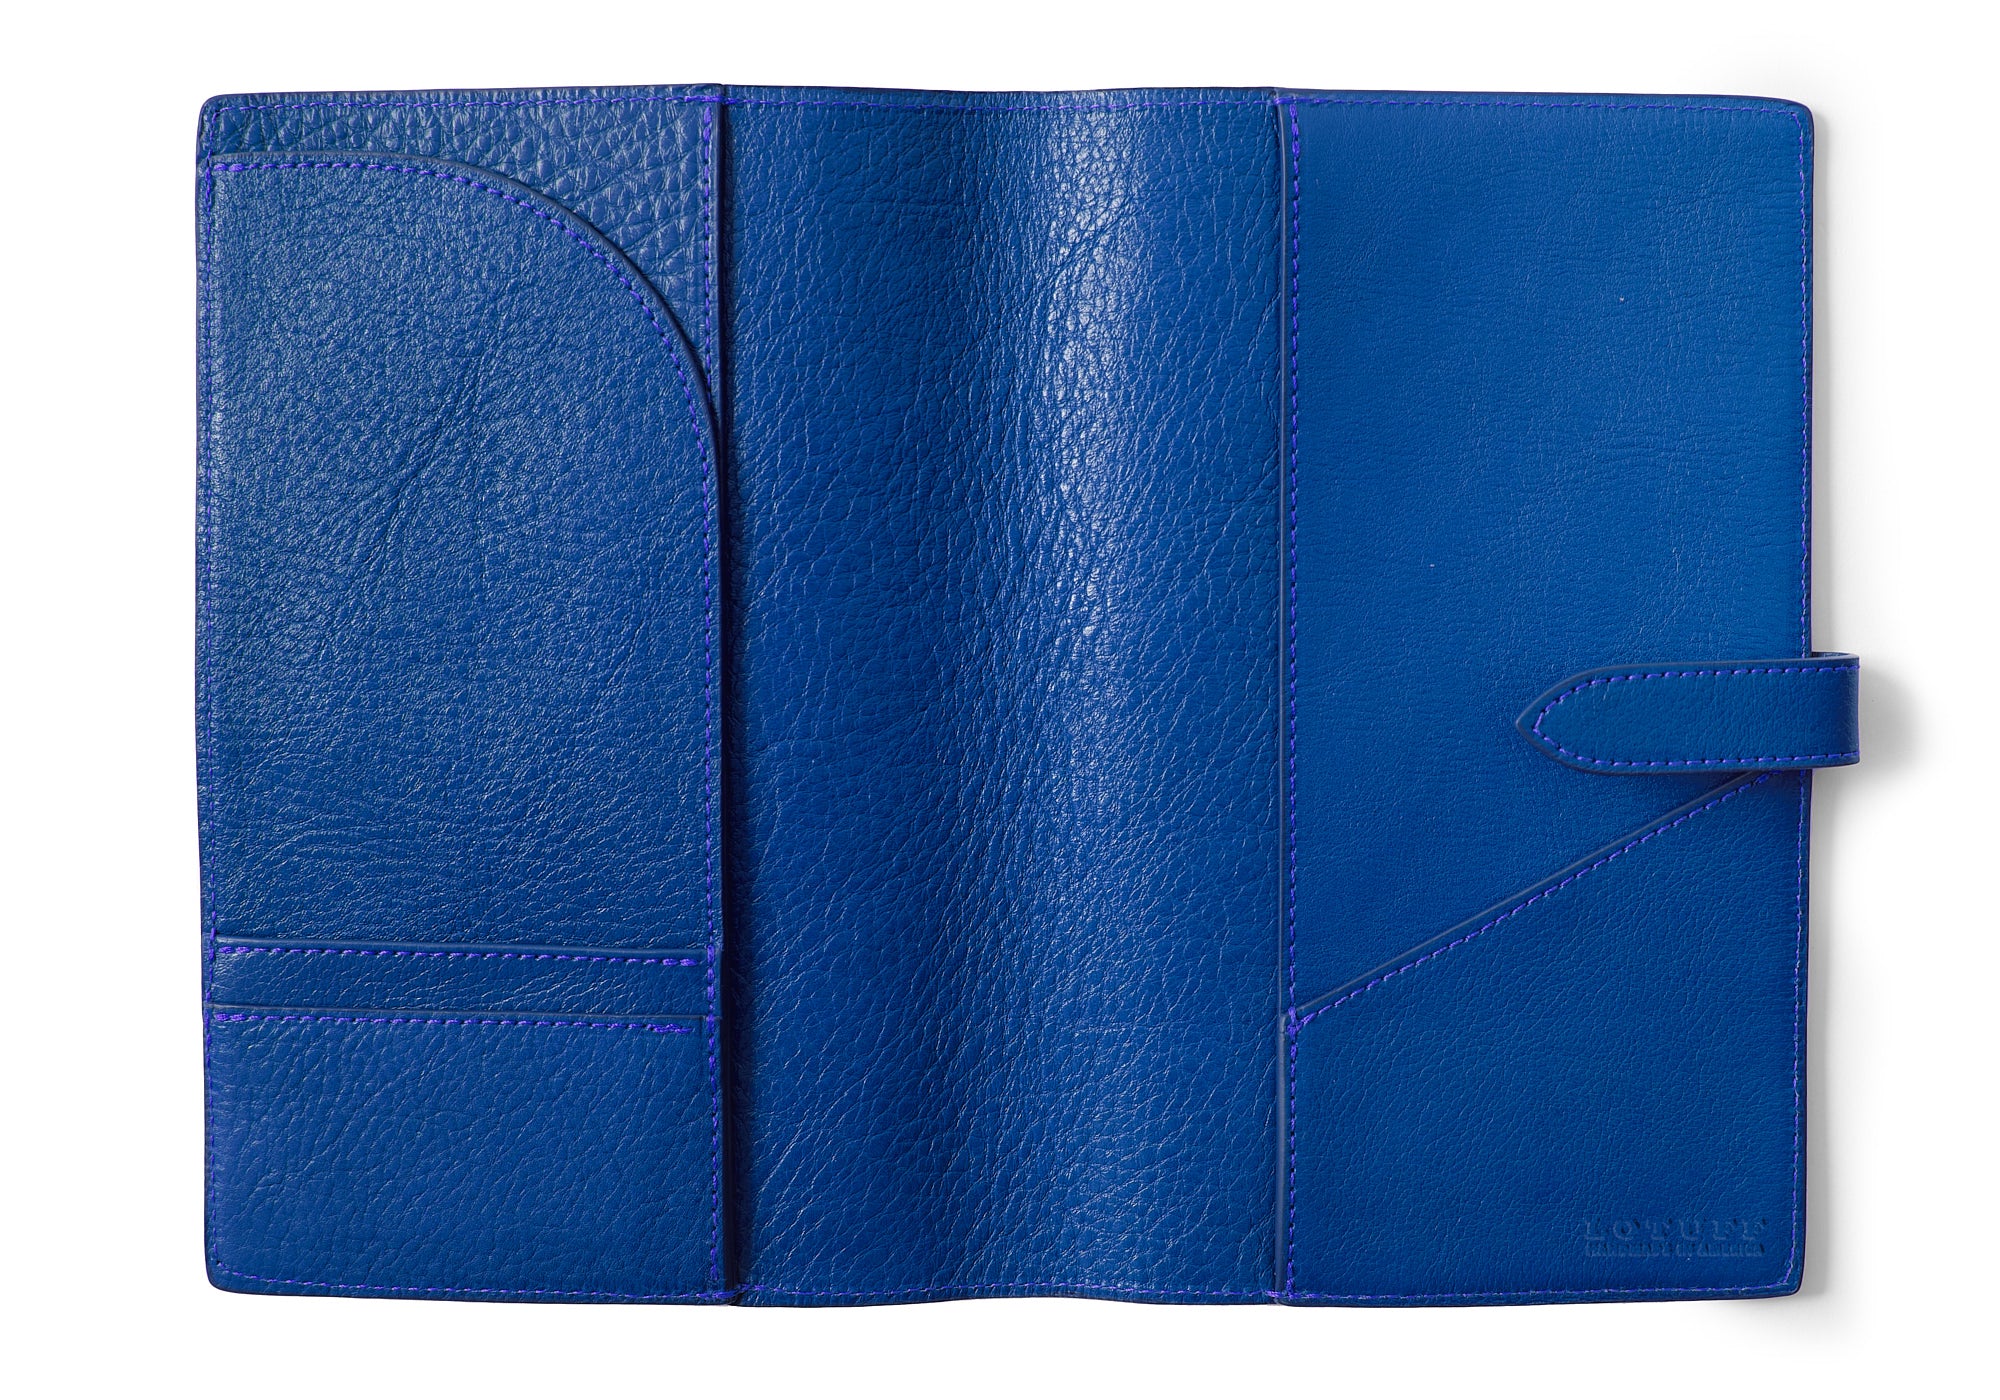 Top of Leather Travel Journal Electric Blue